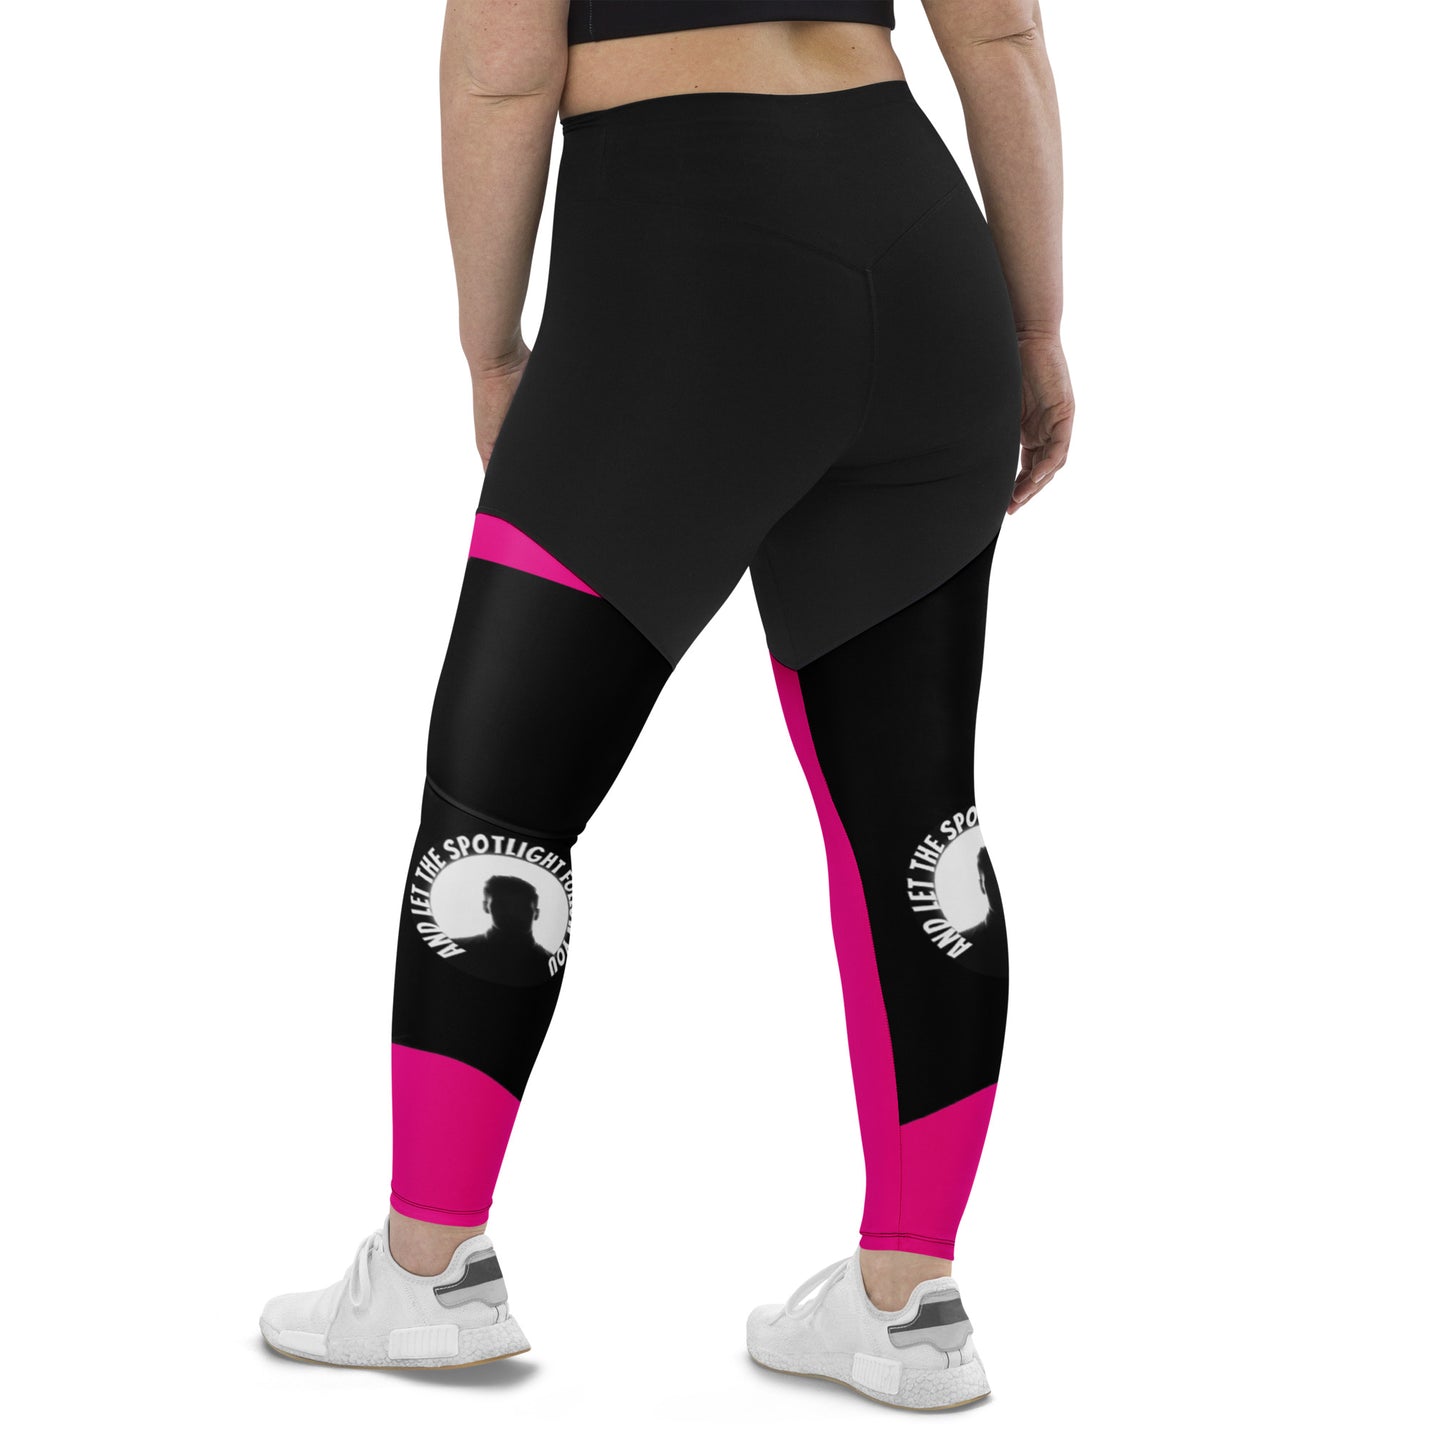 LBS Sports Leggings Plus Size - Violet Red